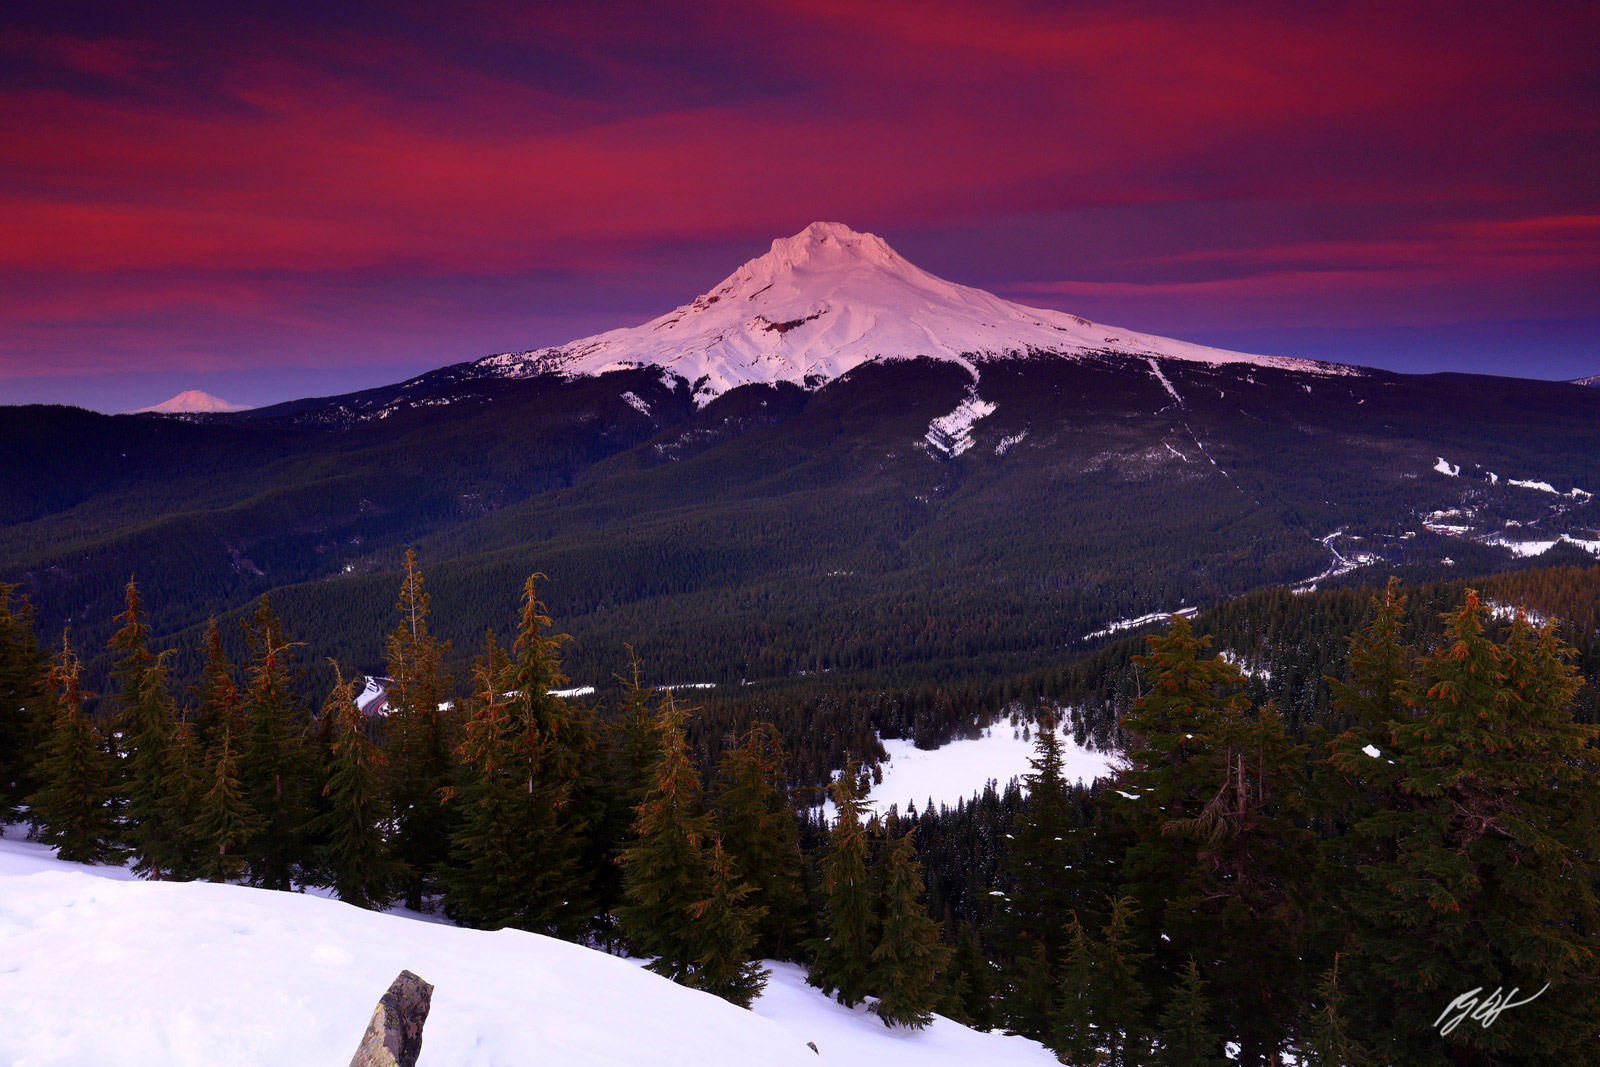 Winter Sunset with Mt Hood and Mt Adams from the Summit of Tom, Dick and Harry Mountain in the Mt Hood Wilderness in Oregon